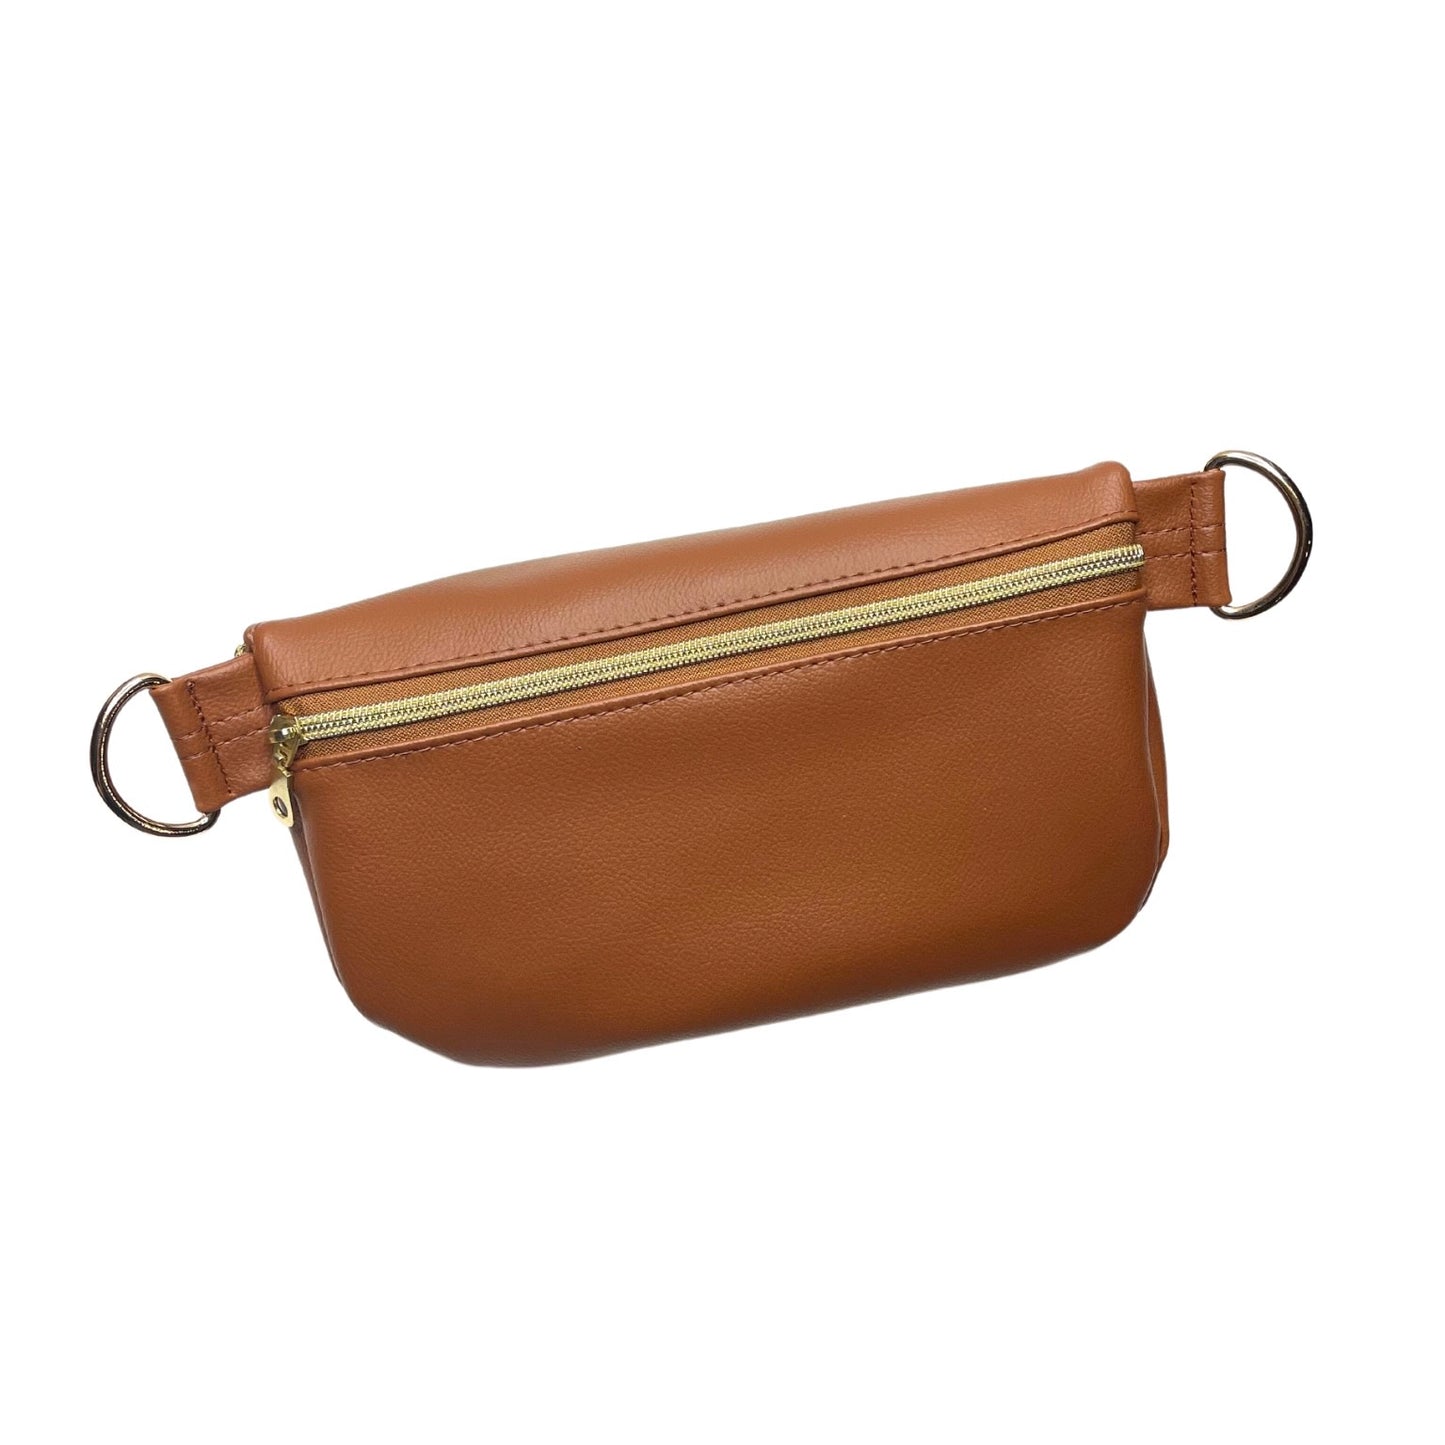 Sidekick Bag Smooth Cognac  (Comes with a basic tan strap. Please check out our selection of additional decorative straps for purchase.)